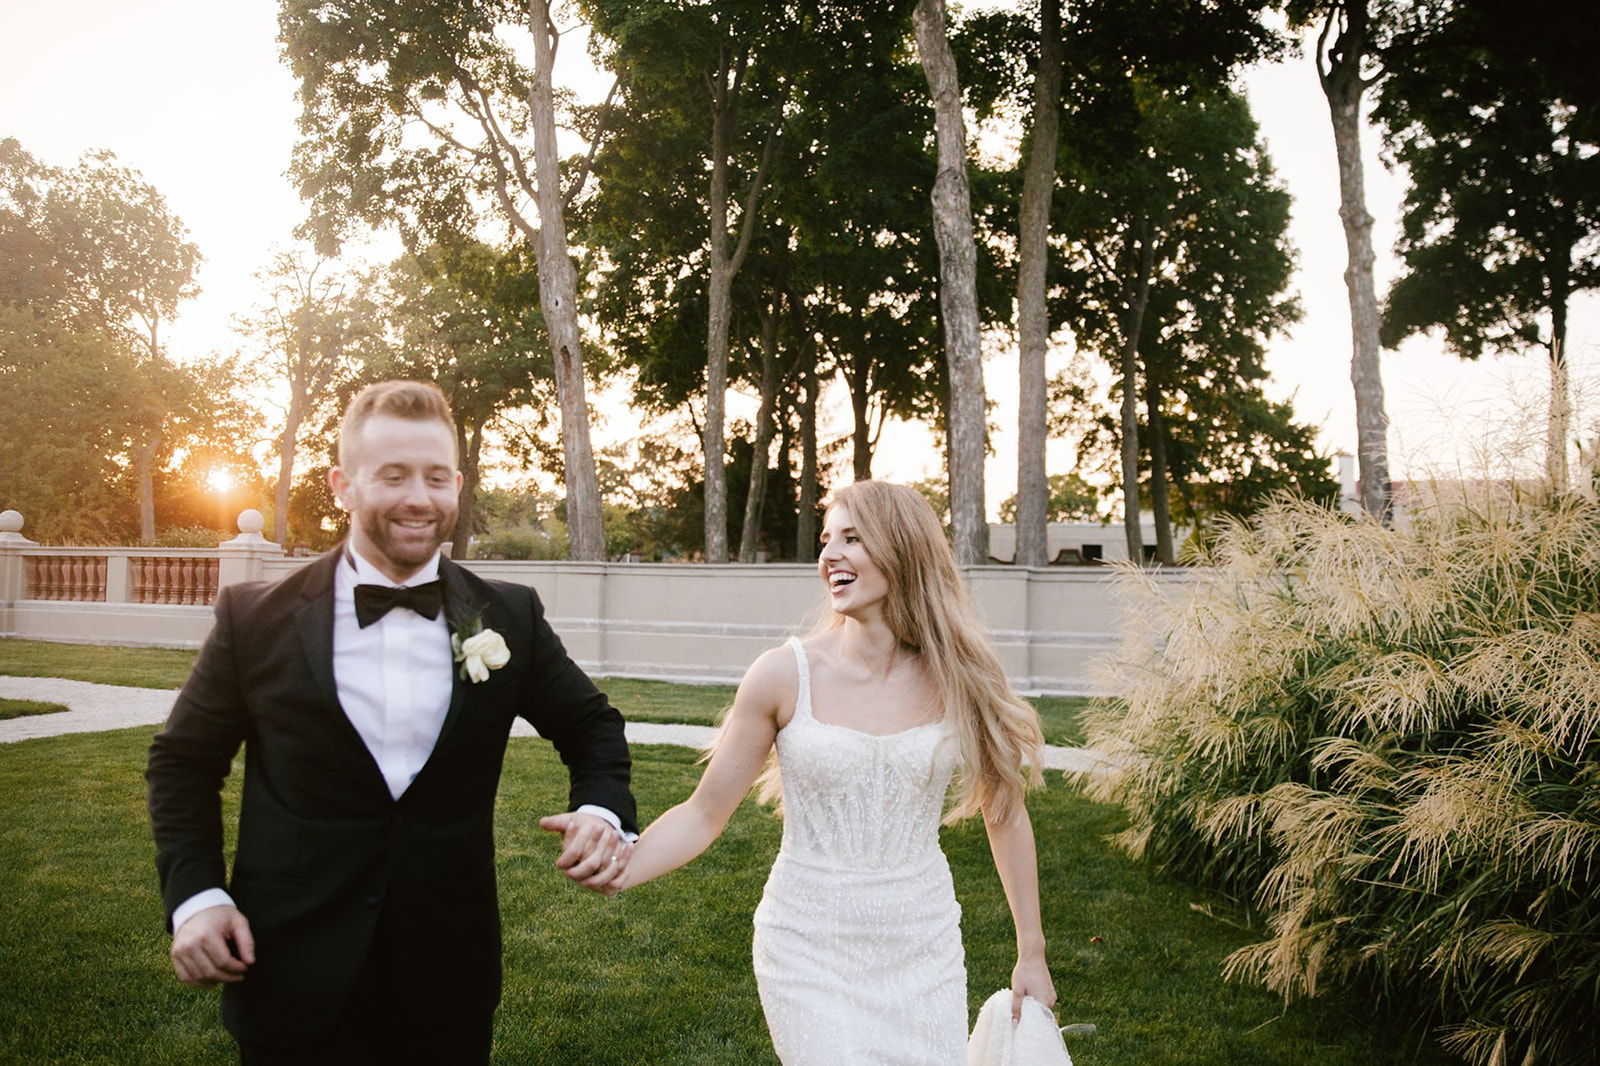 Stunning sunset captures at Armour House frame the love and beauty of the bride and groom's unforgettable day.